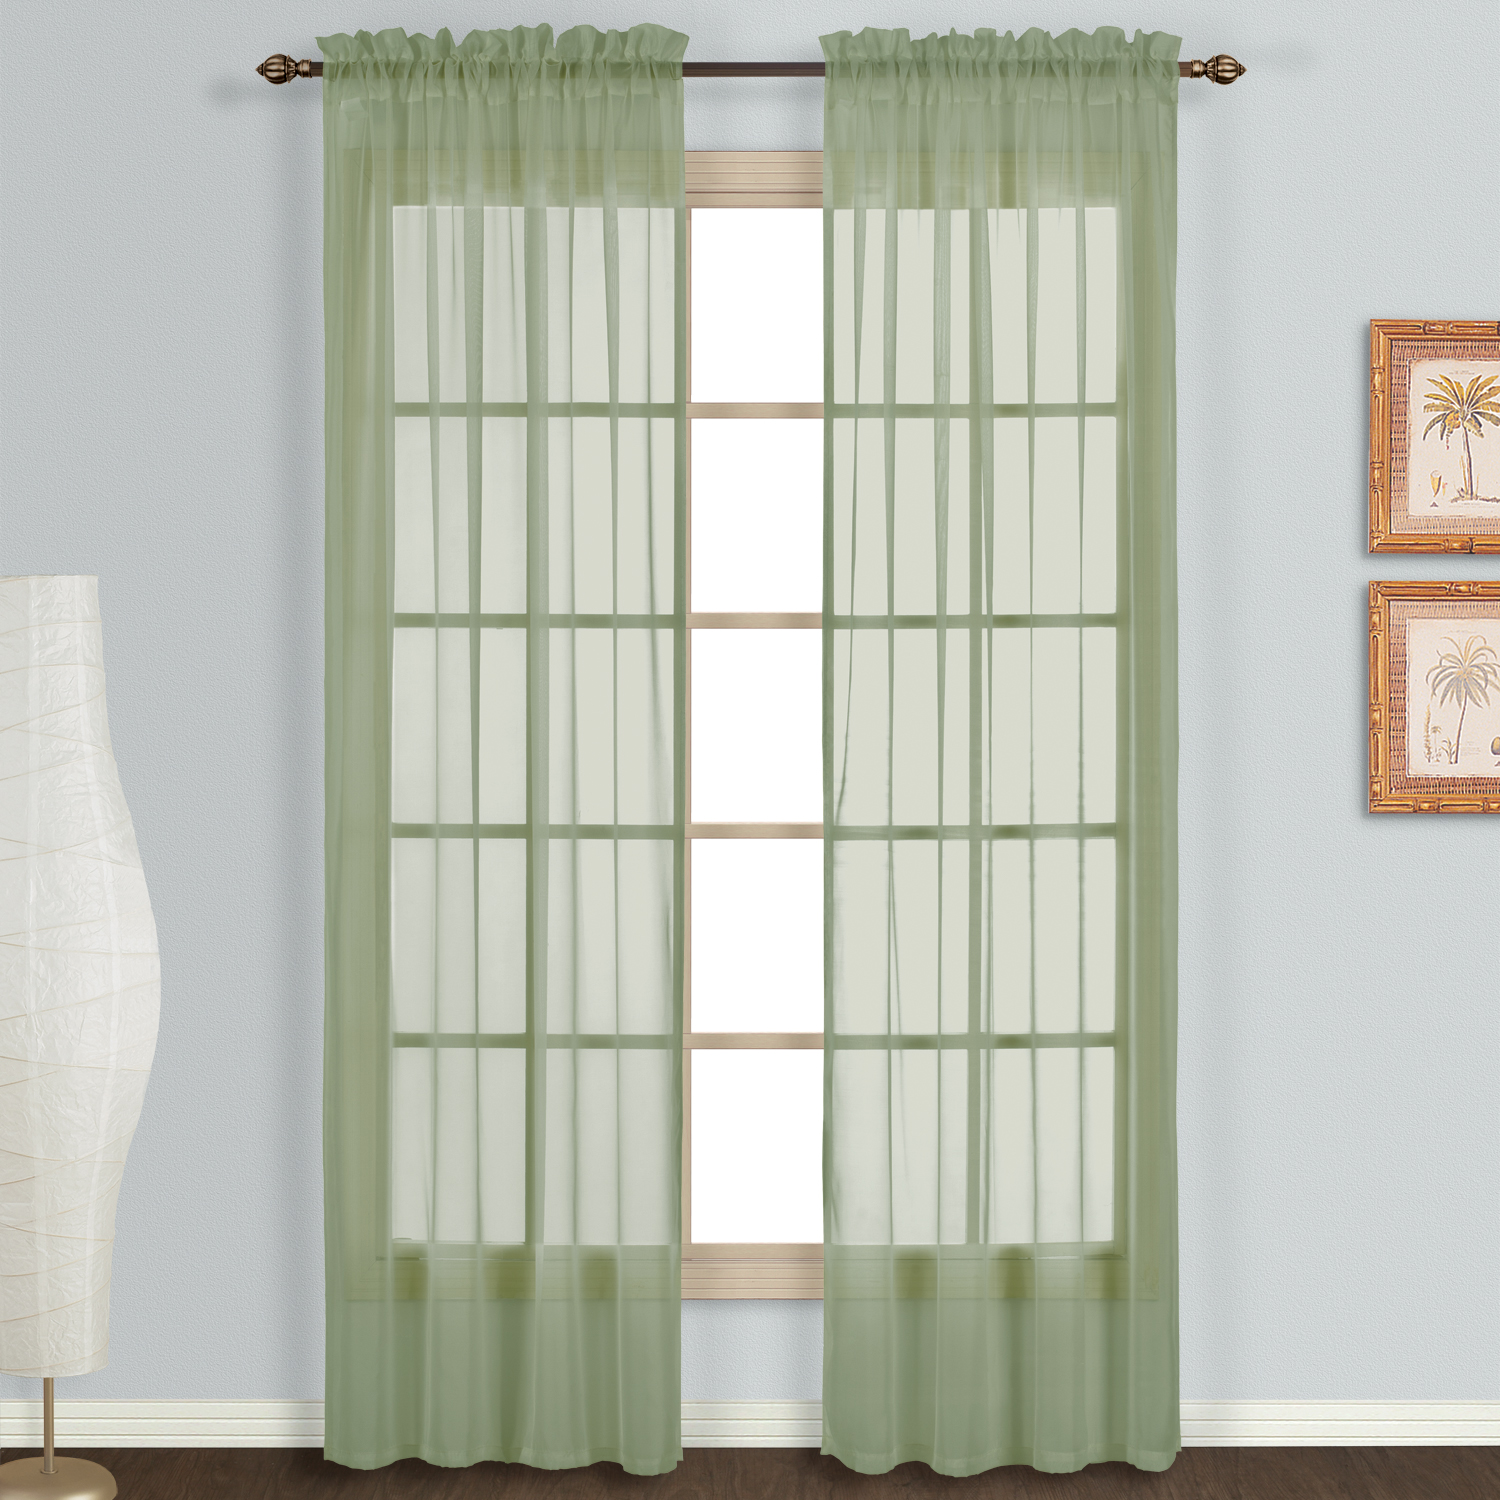 United Curtain Company Monte Carlo 118" x 108" voile window panel pair